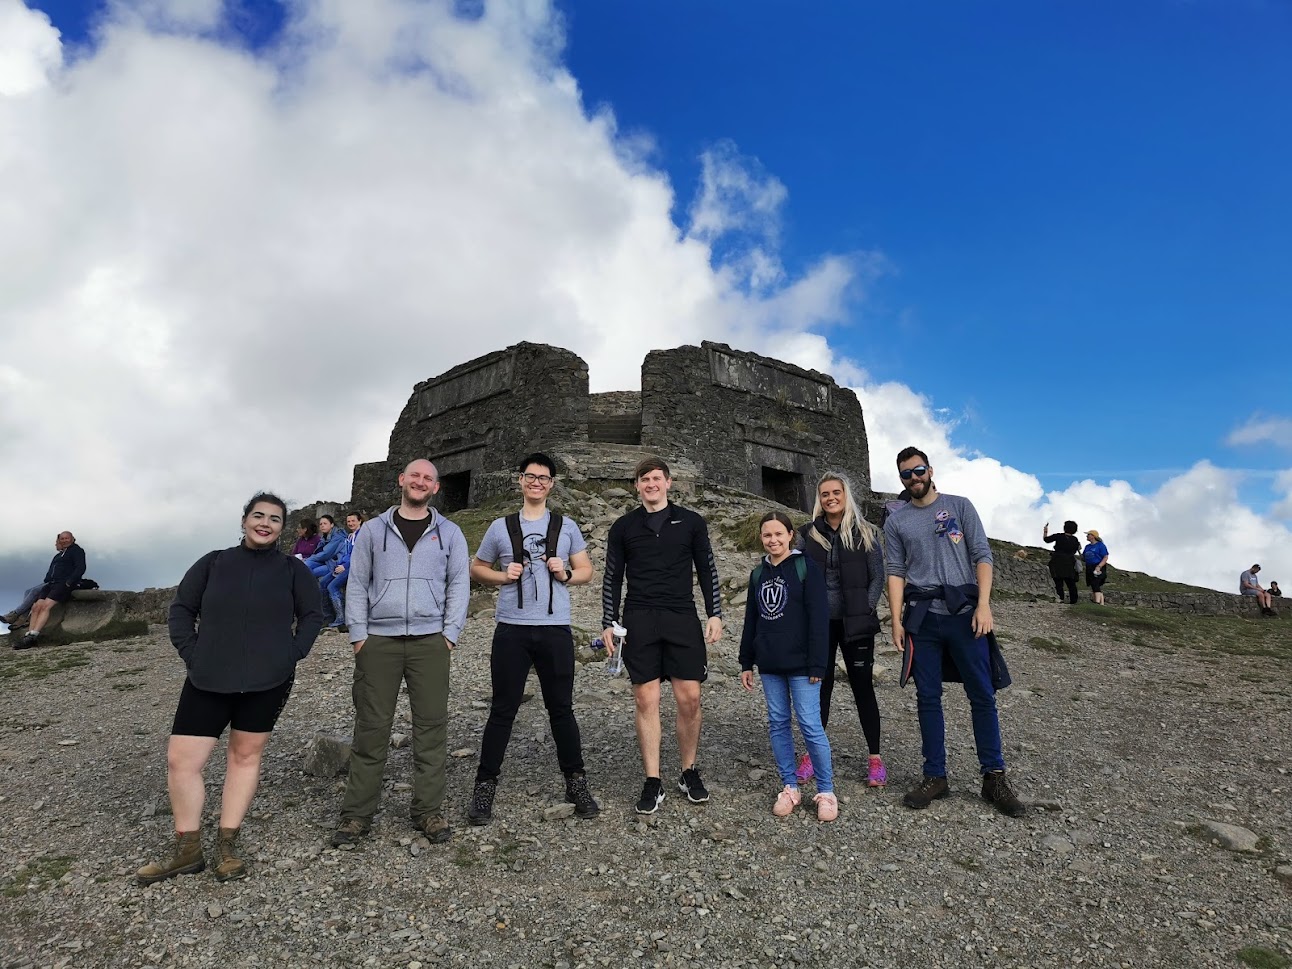 2021 group photo from trip to Moel Famau. Left to right: Jacqui, Josh, Chung, Cameron, Edyta, Jess and Dom.